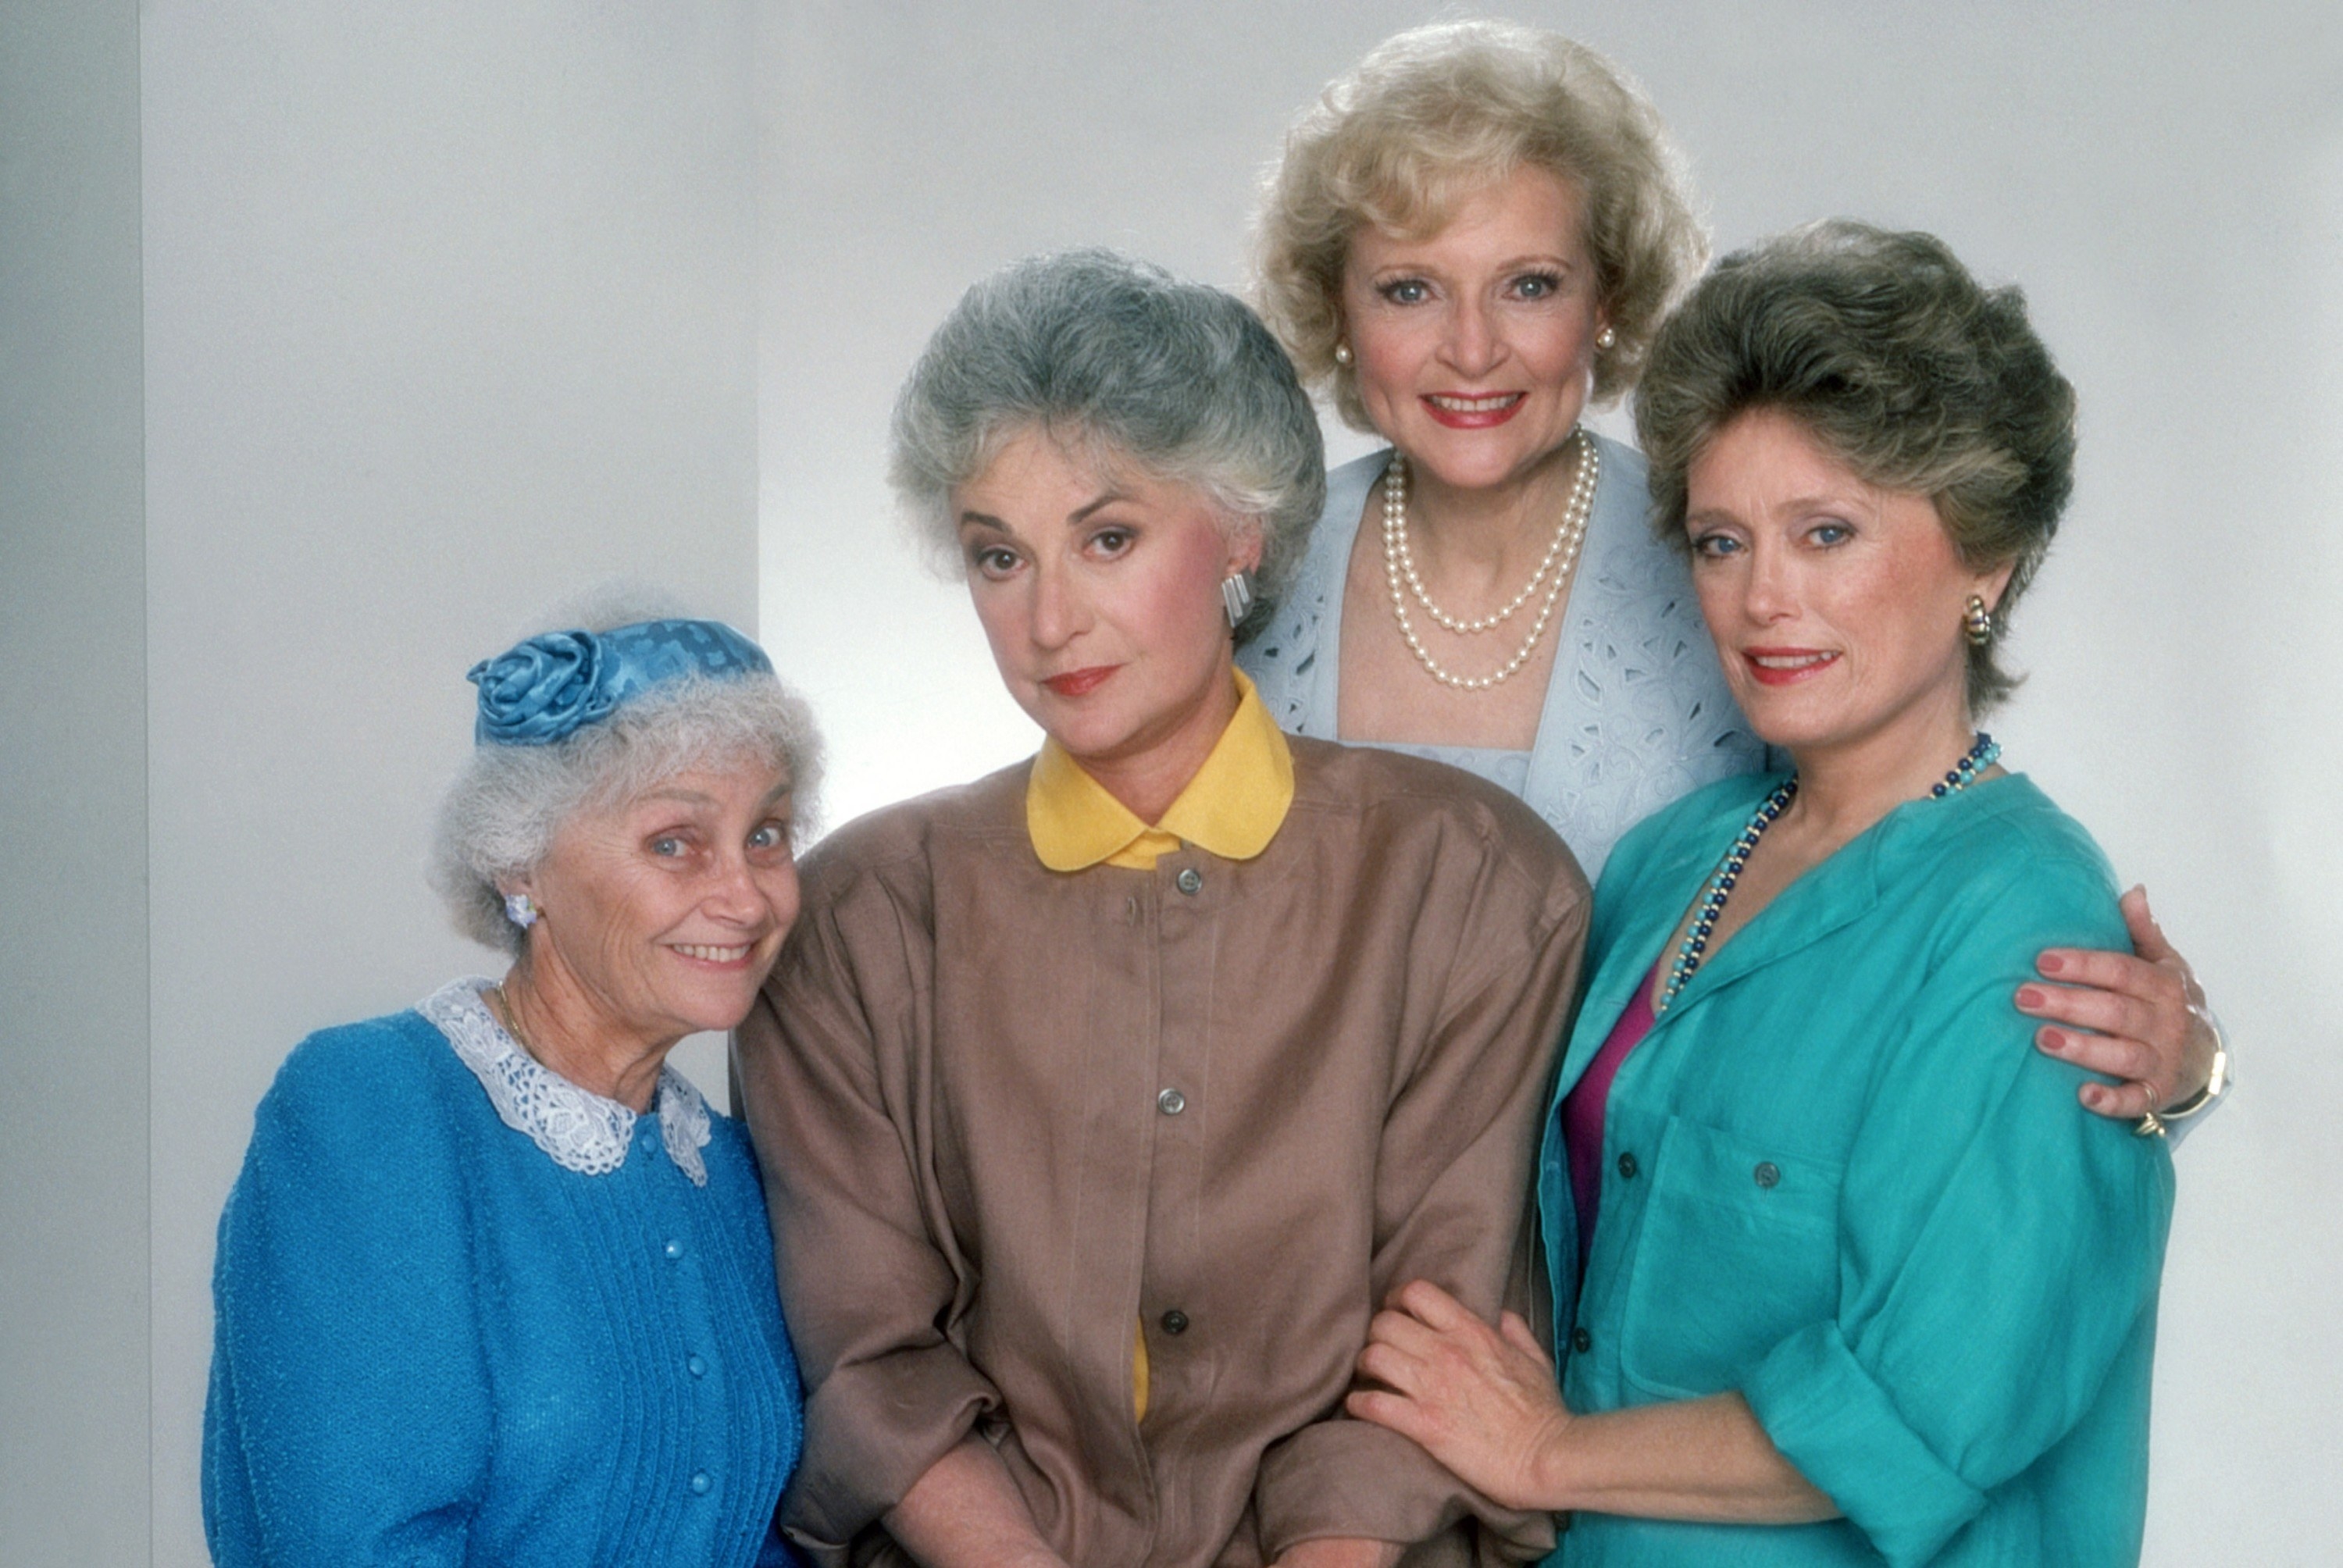 Estelle Getty, Bea Arthur, Betty White, and Rue McClanahan pose together